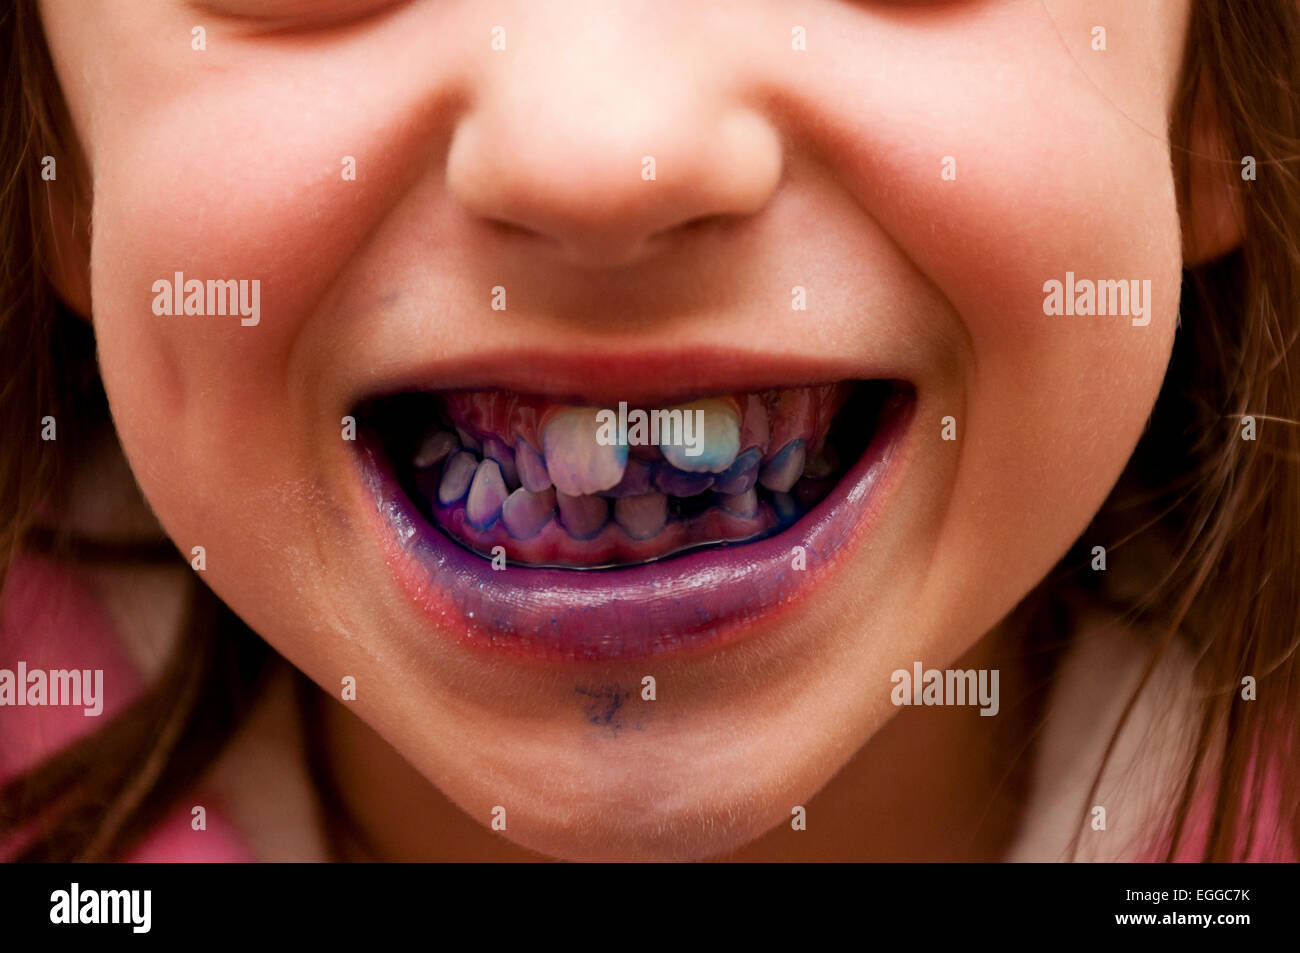 Child using disclosing tablets to show plaque on teeth Stock Photo